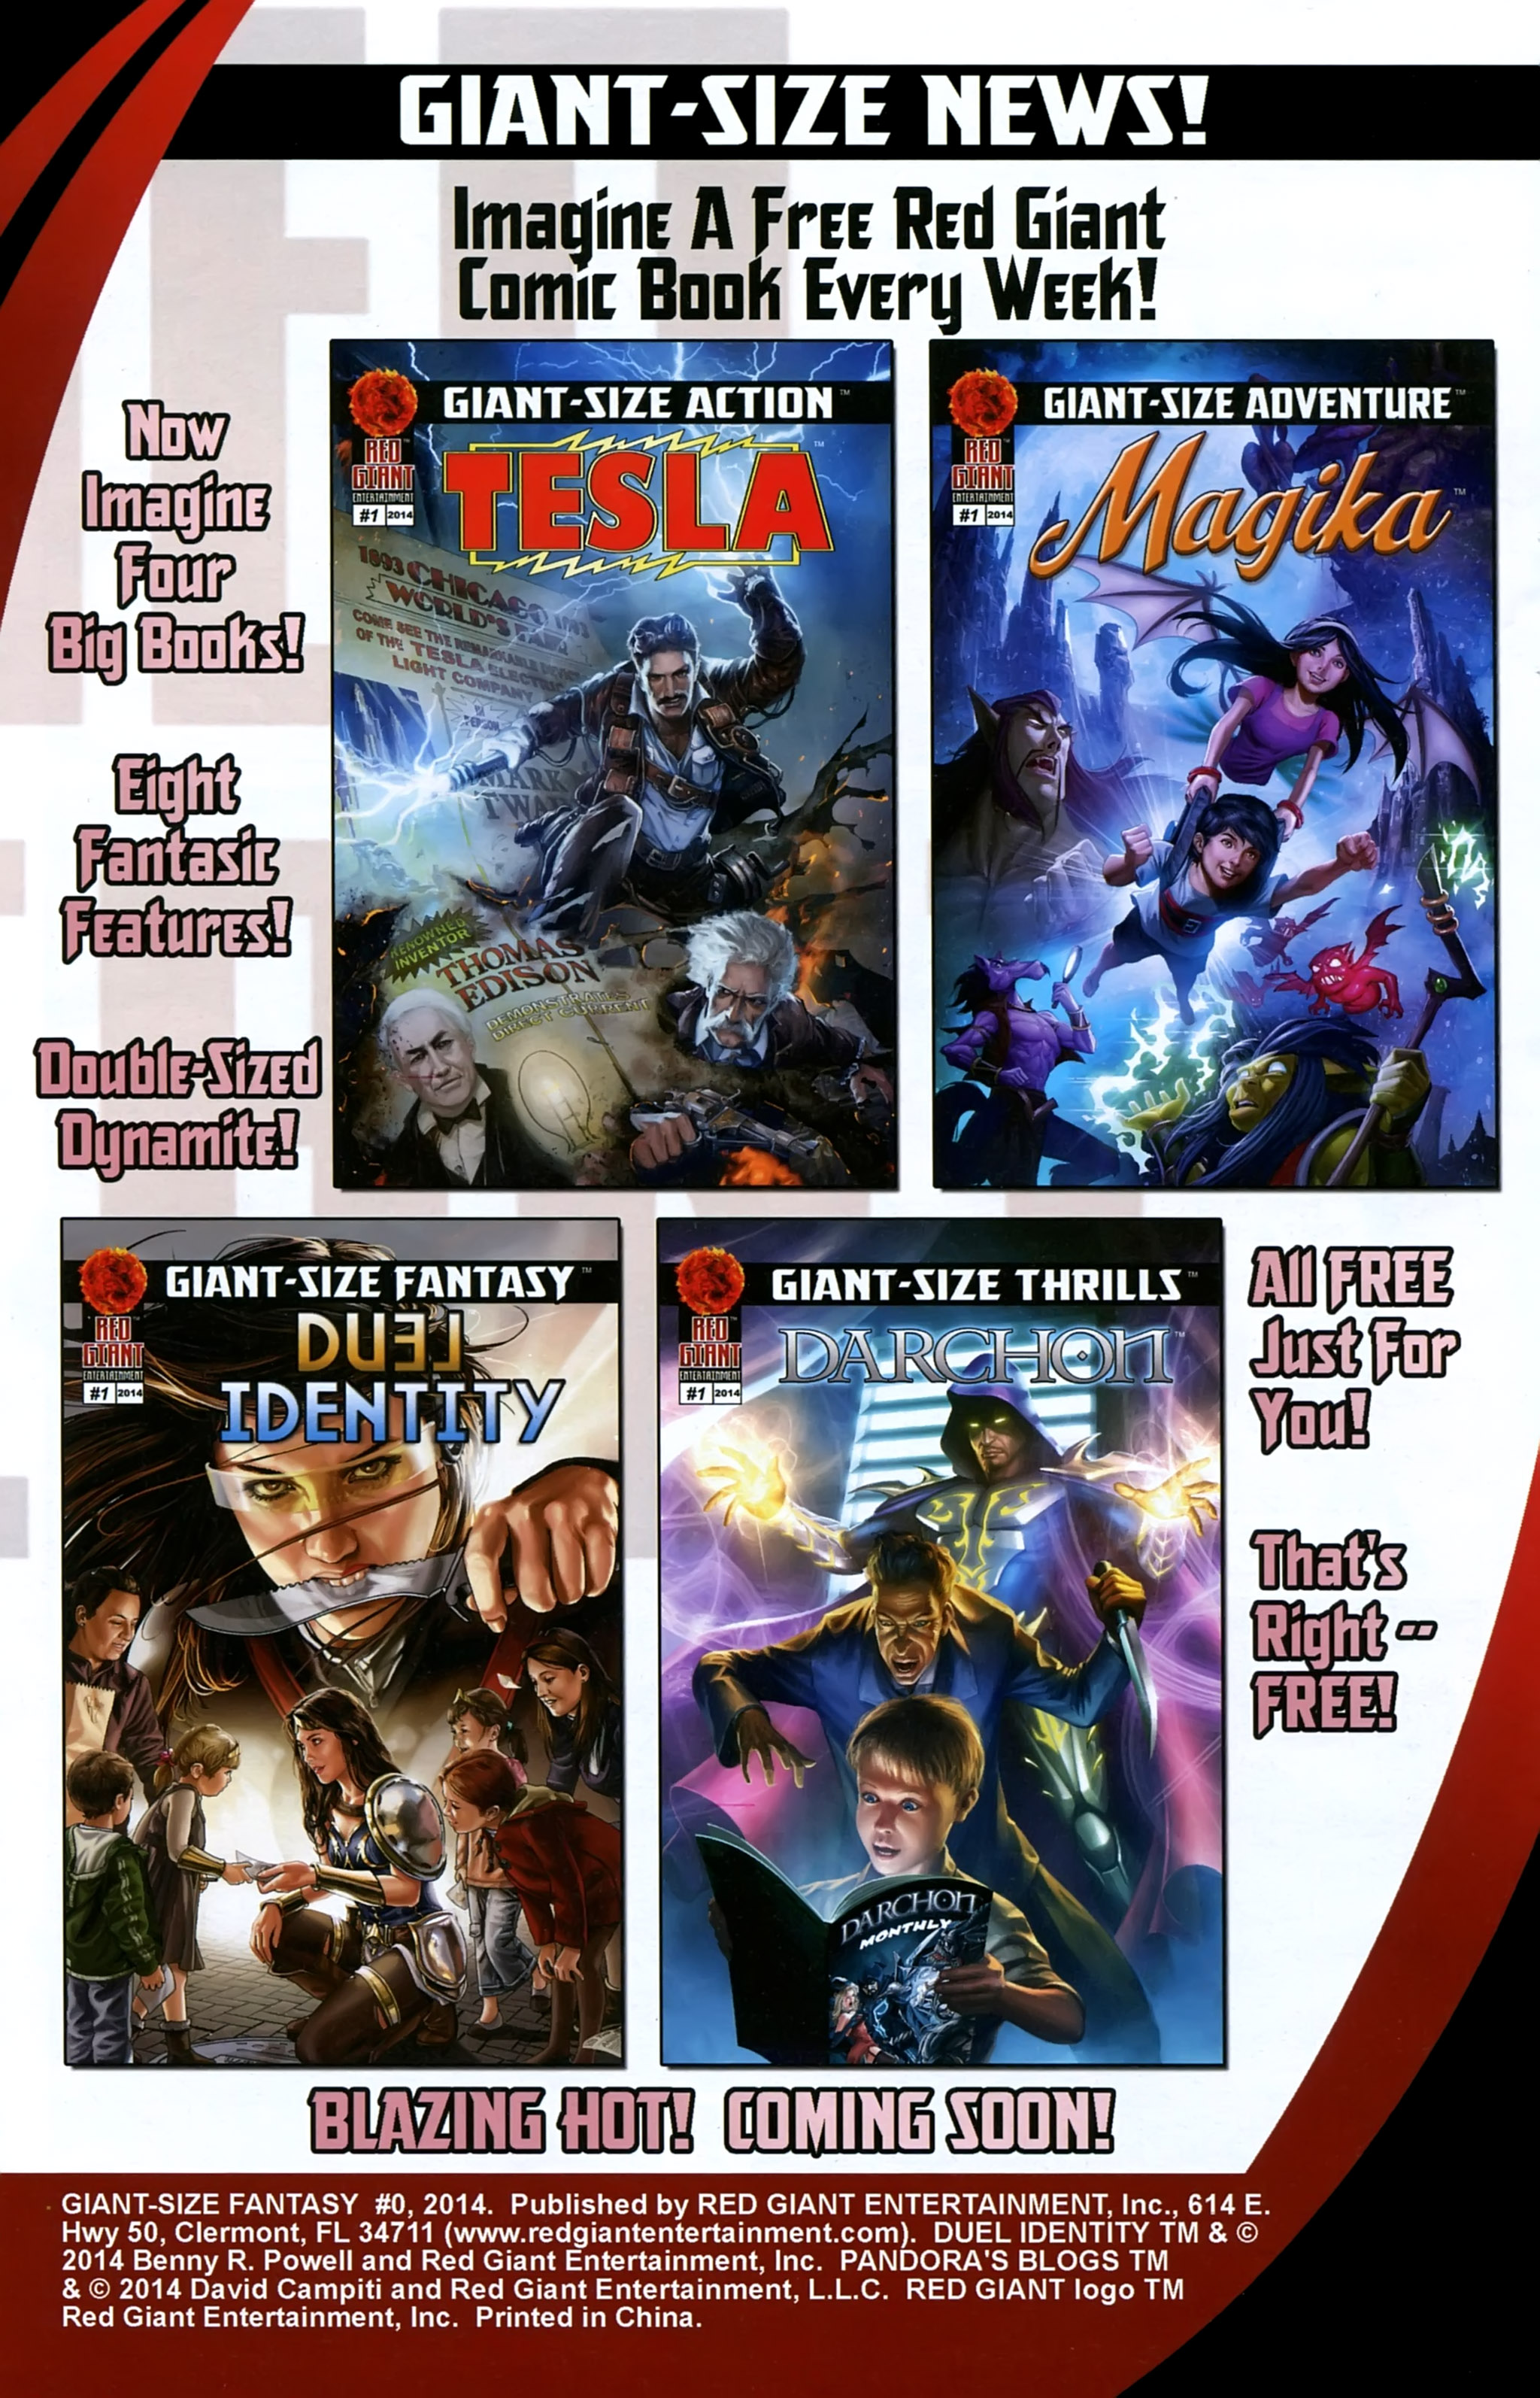 Read online Free Comic Book Day 2014 comic -  Issue # Red Giant - Giant Size Fantasy - Duel Identity & Pandora's Blogs Flipbook - 32